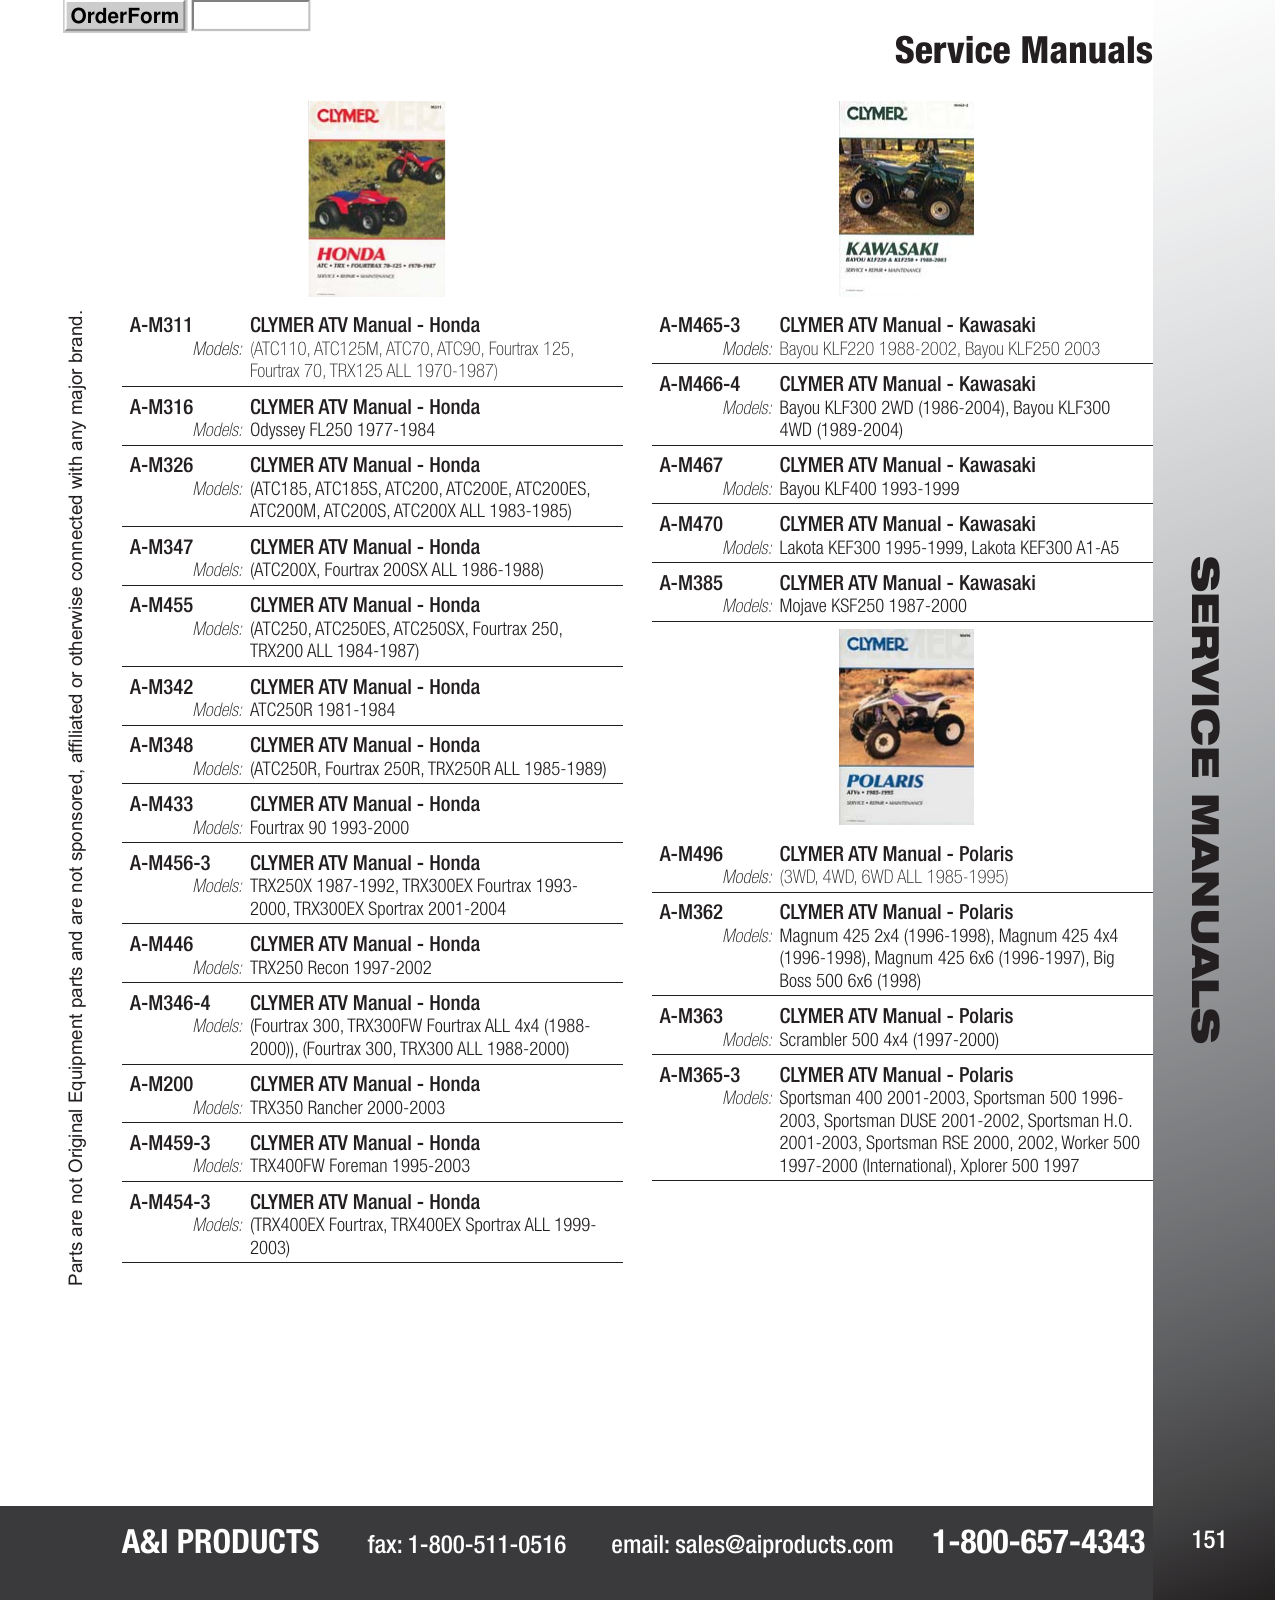 Page 7 of 8 - Catalog  !! Manuals